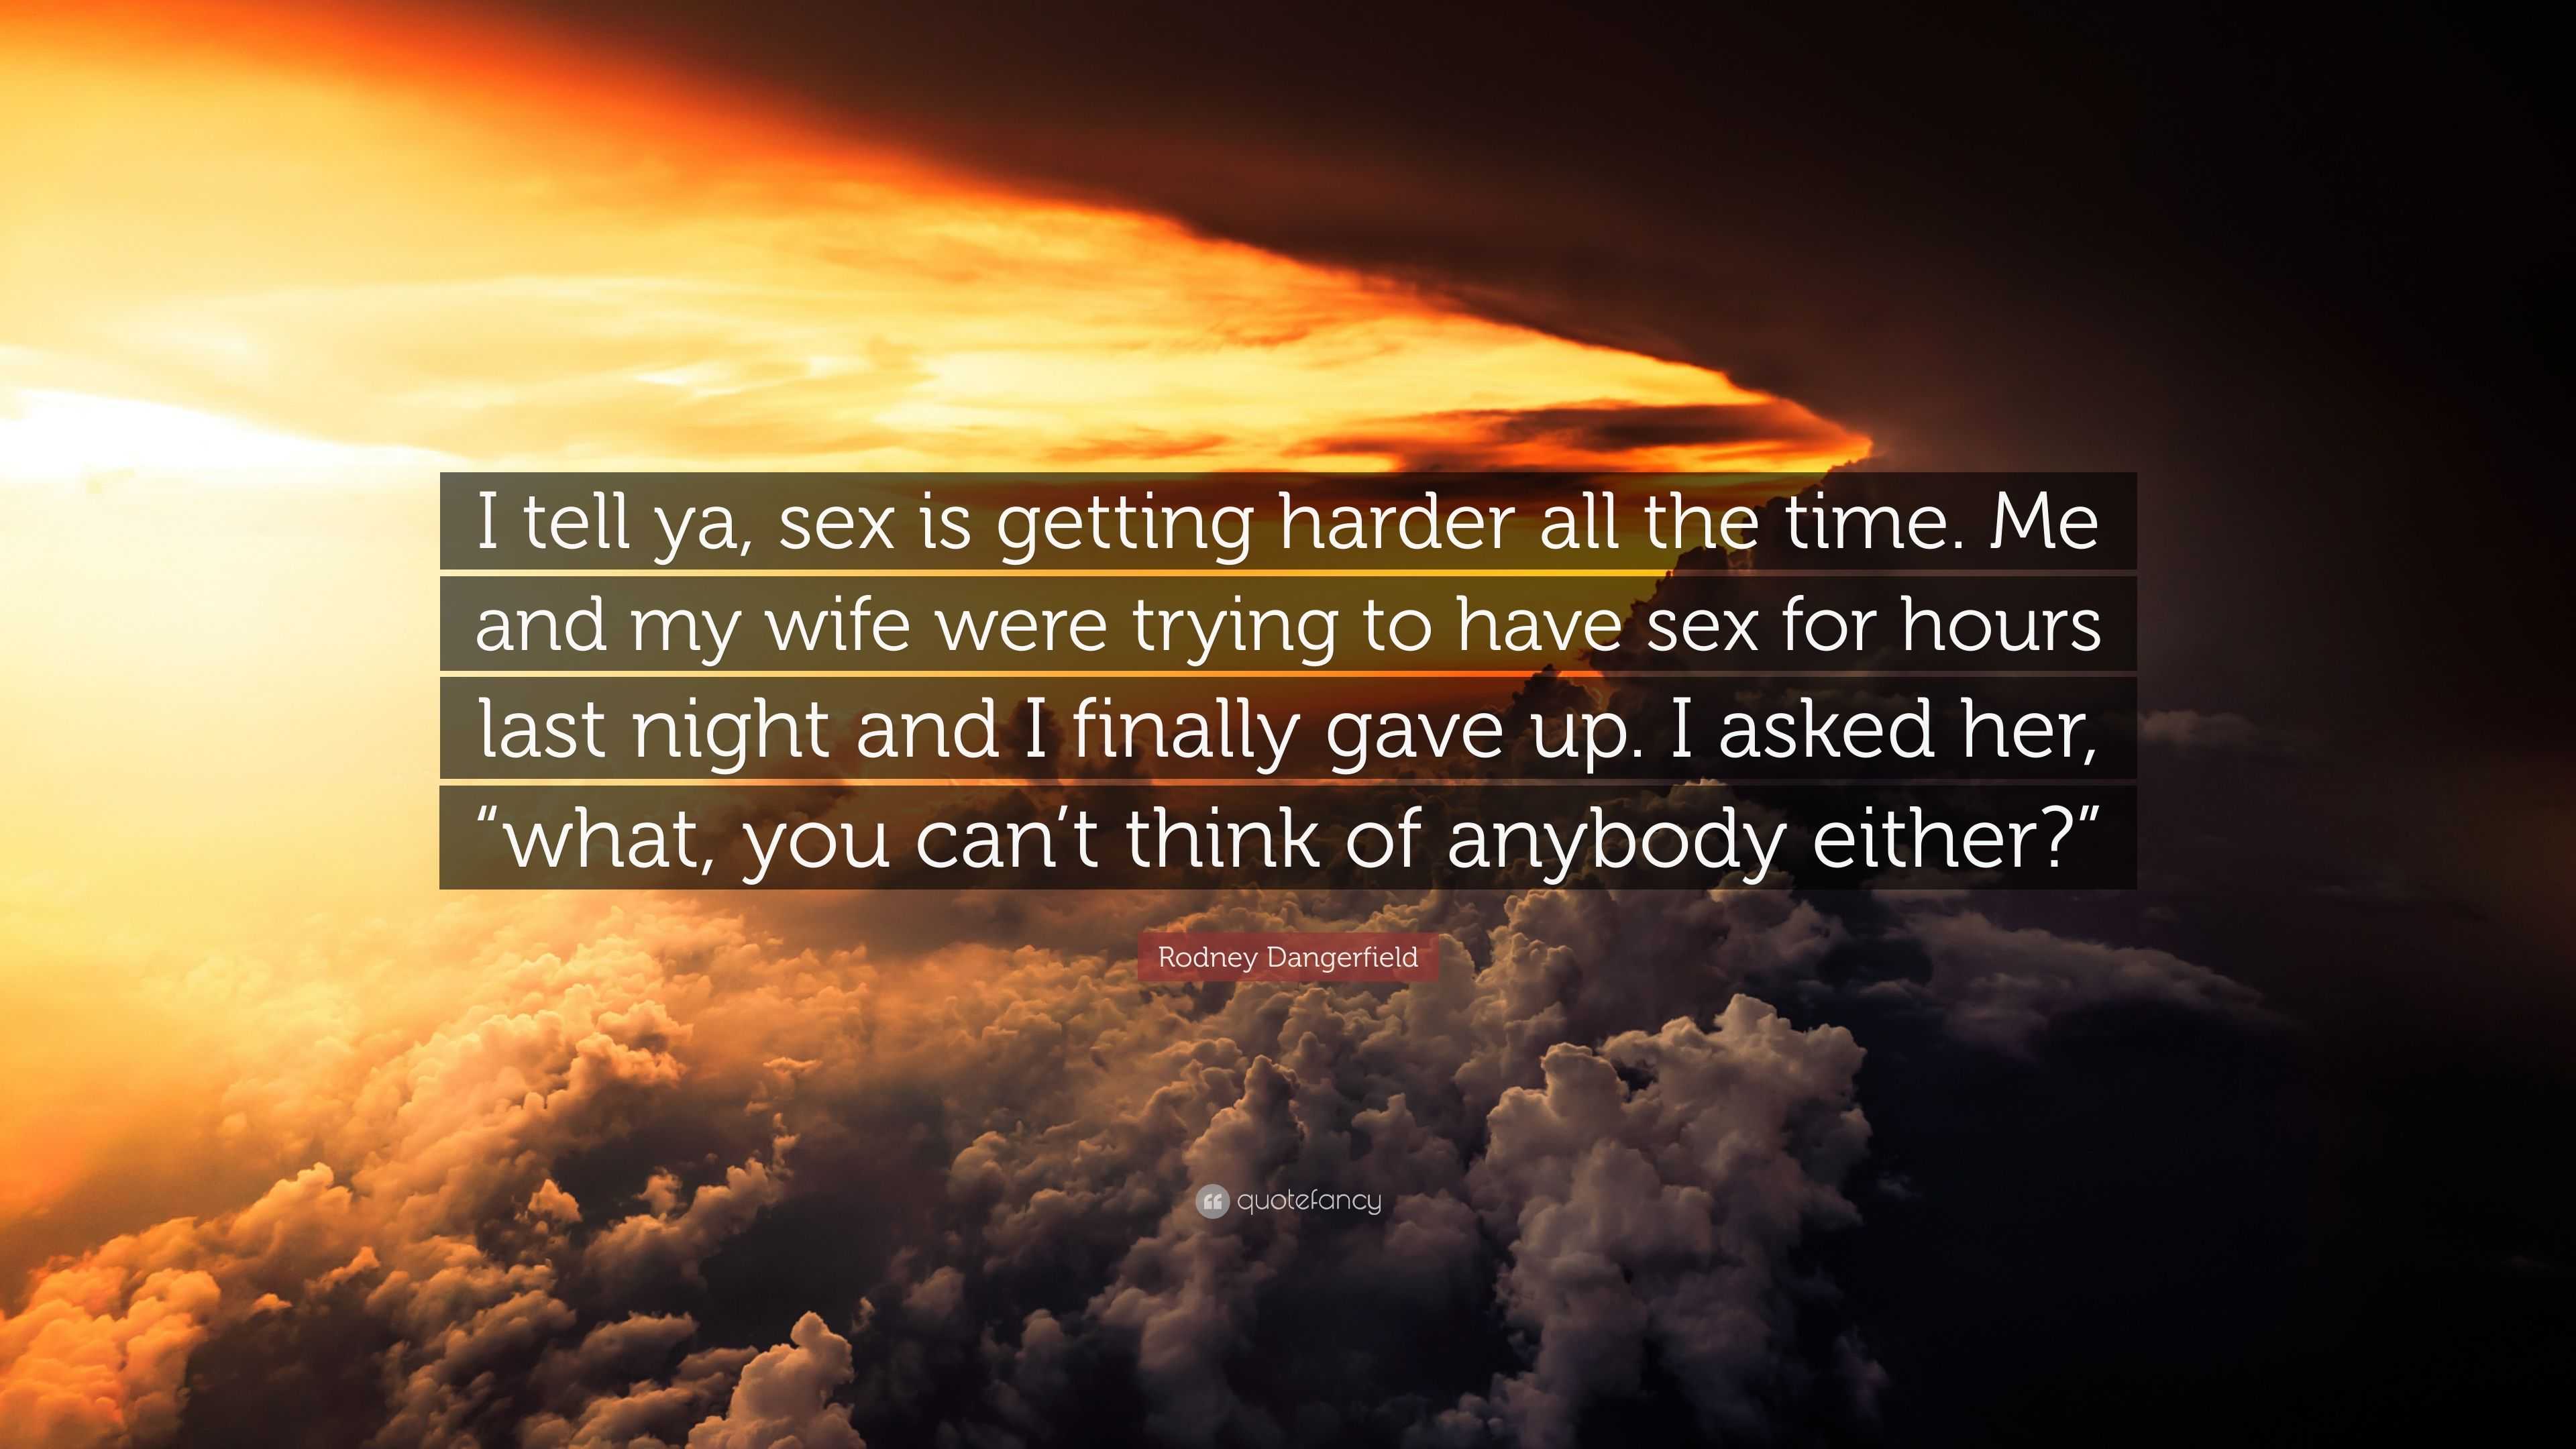 Rodney Dangerfield Quote “I tell ya, sex is getting harder all the time pic